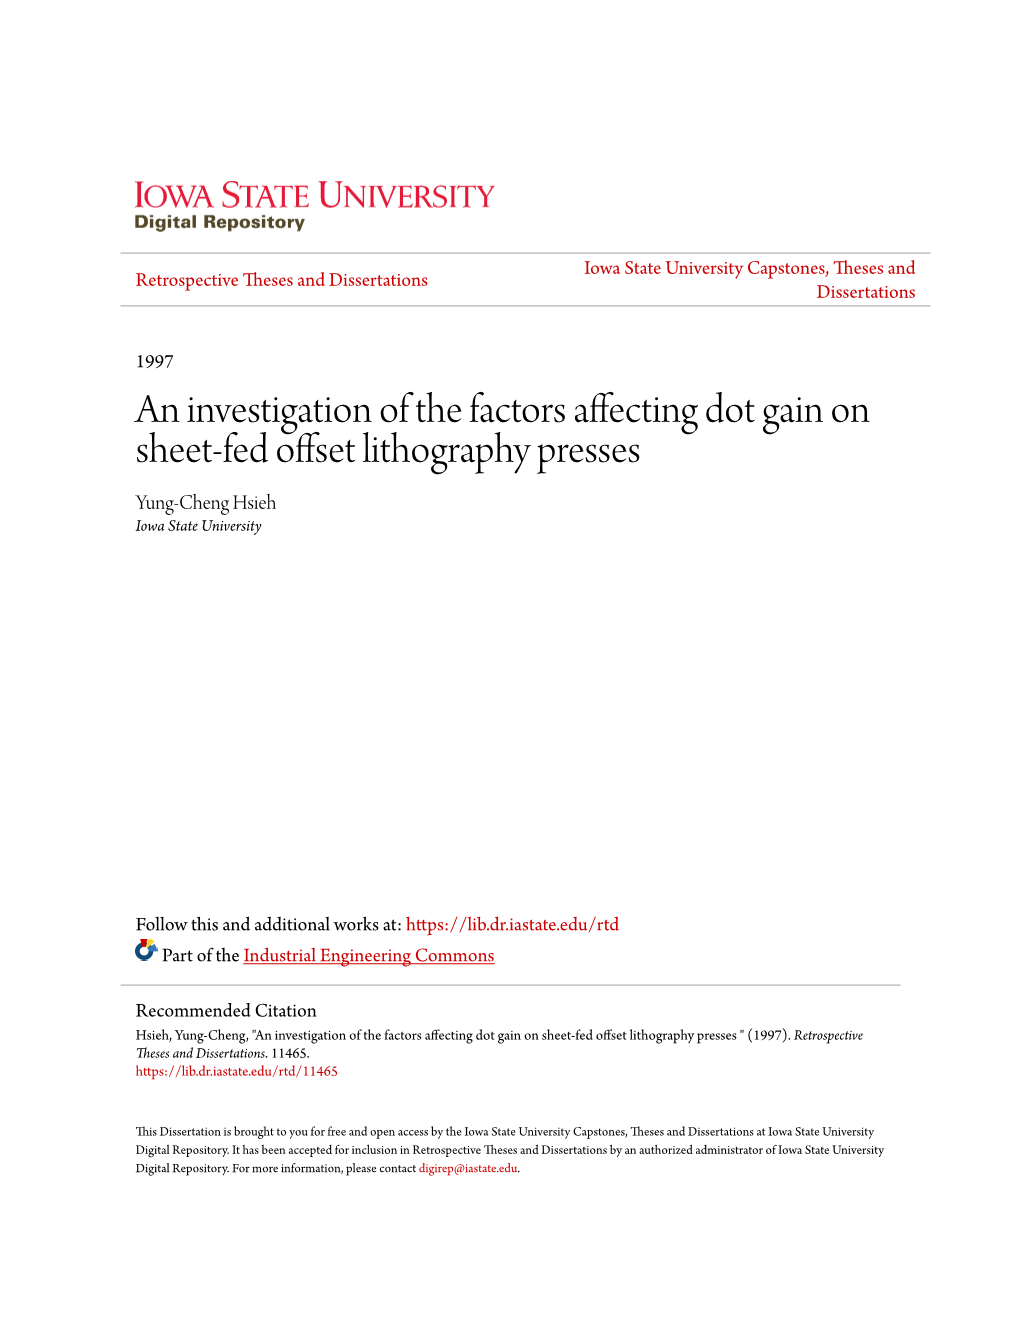 An Investigation of the Factors Affecting Dot Gain on Sheet-Fed Offset Lithography Presses Yung-Cheng Hsieh Iowa State University